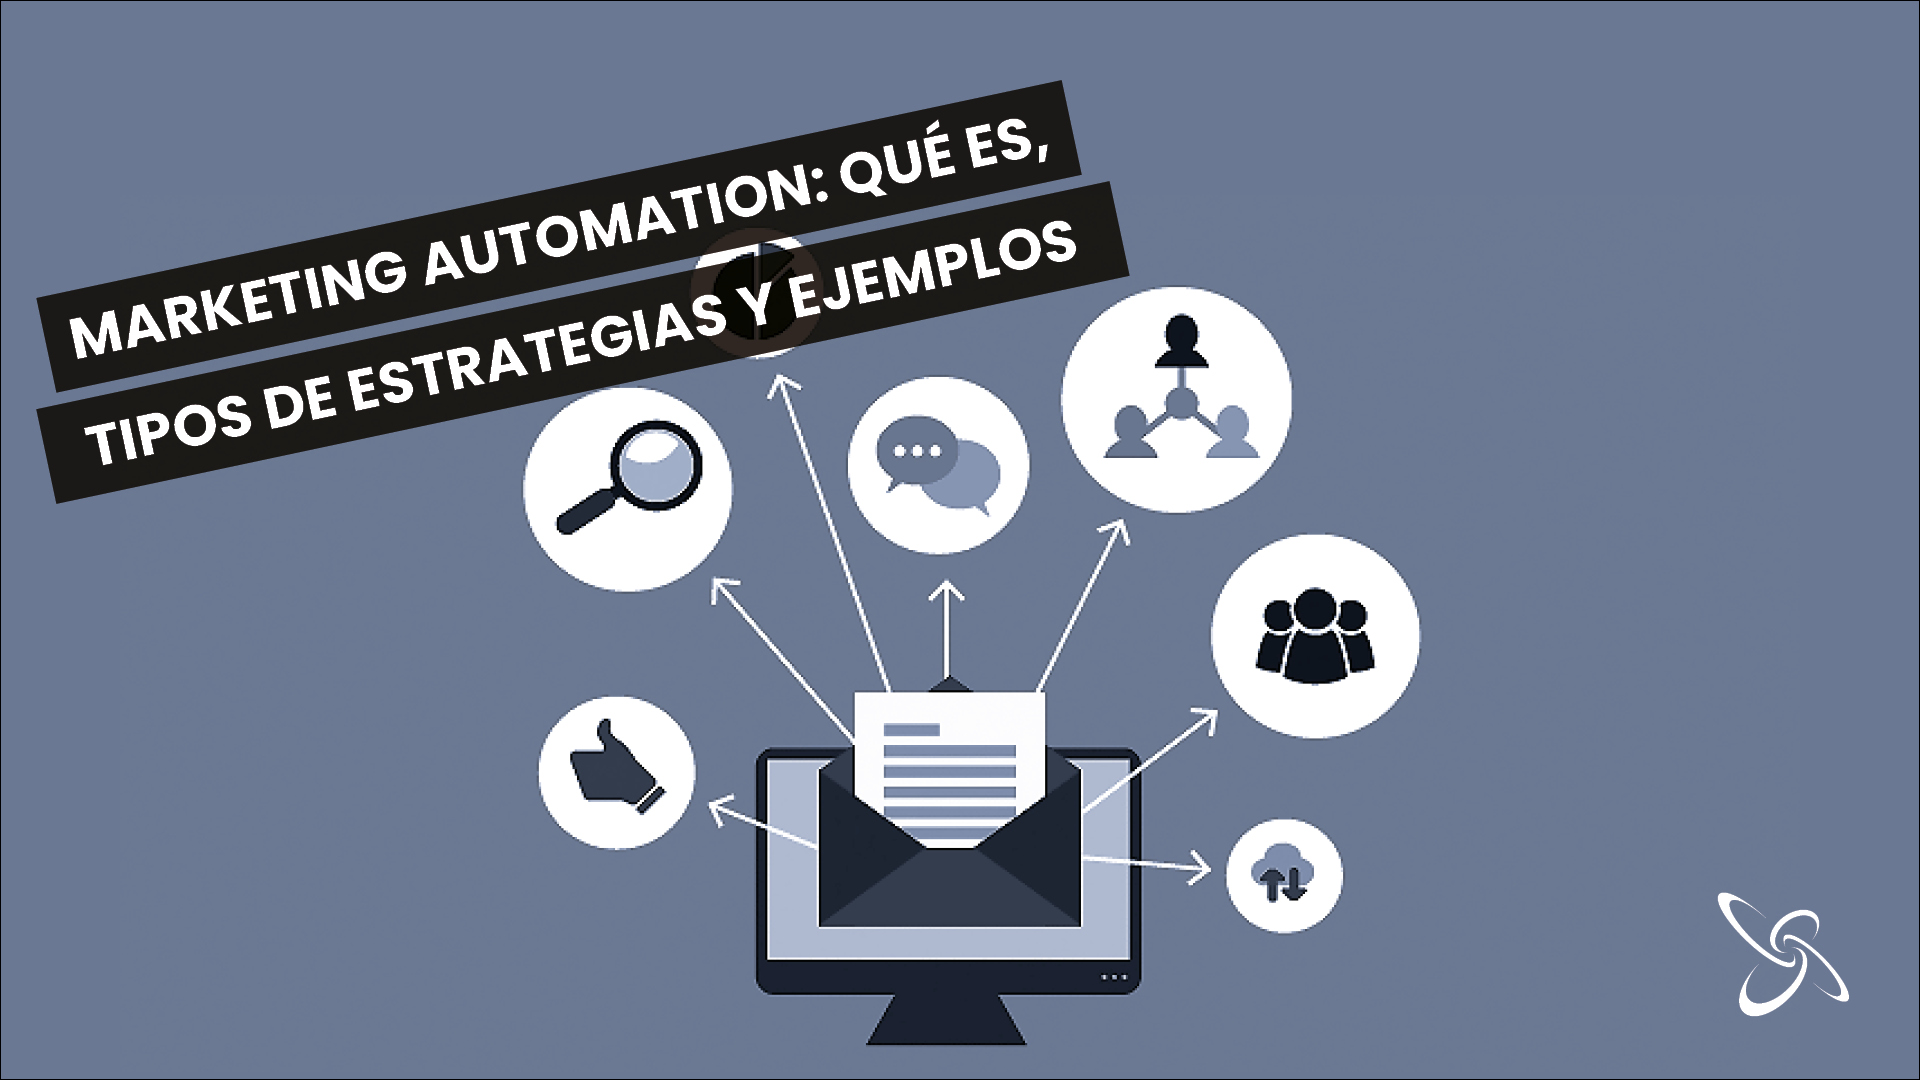 Marketing automation: What it is, types of strategies and examples